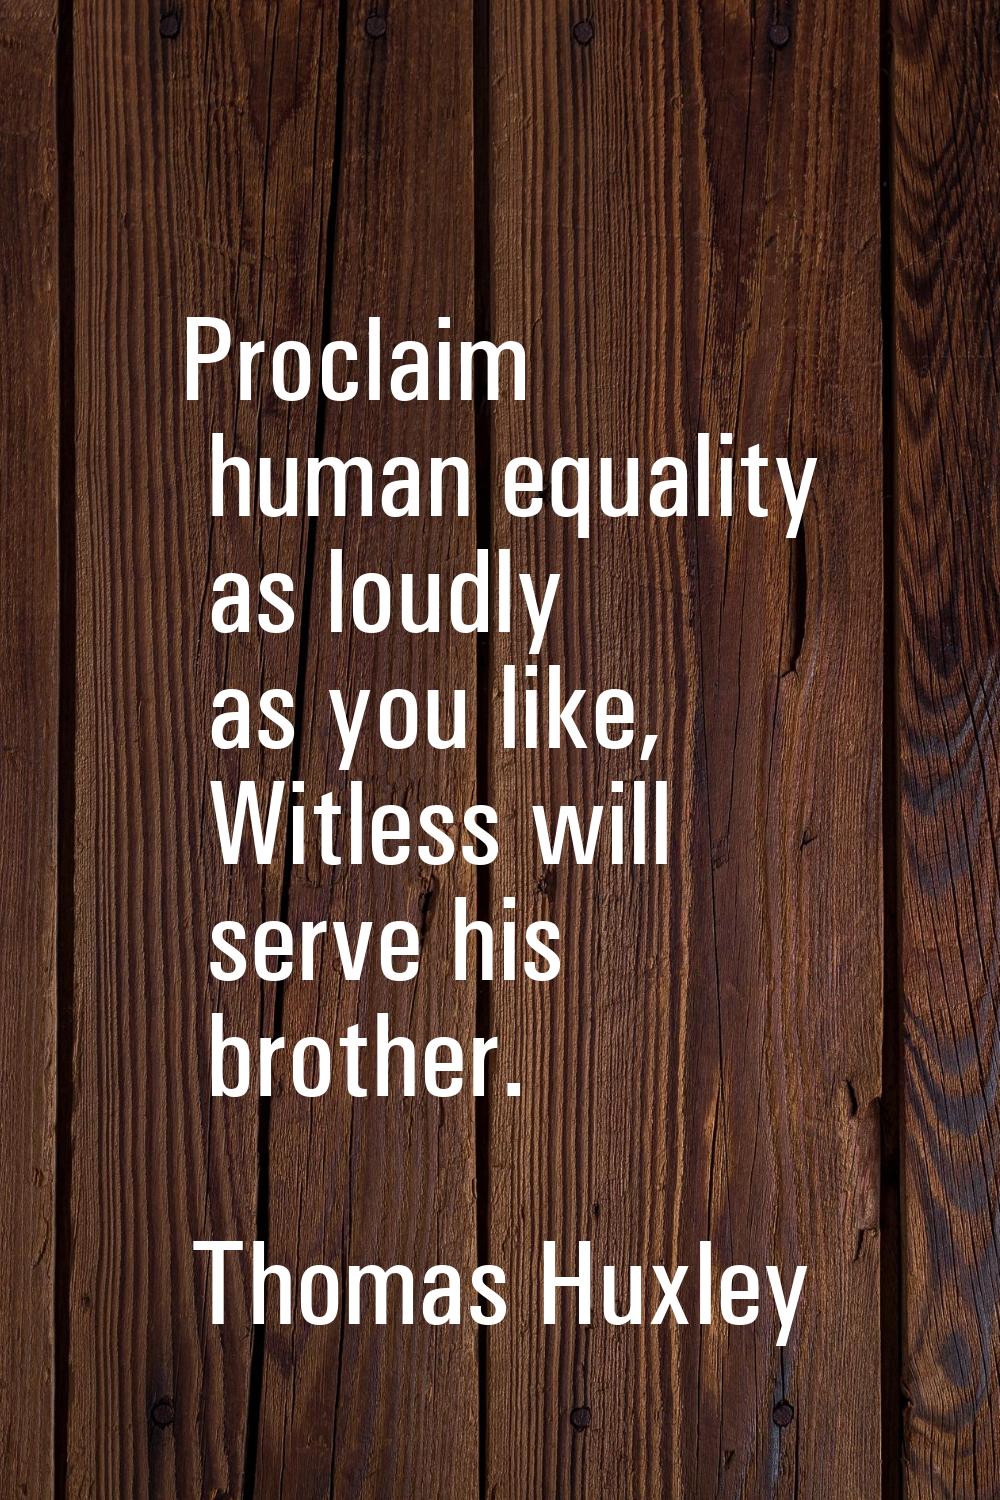 Proclaim human equality as loudly as you like, Witless will serve his brother.